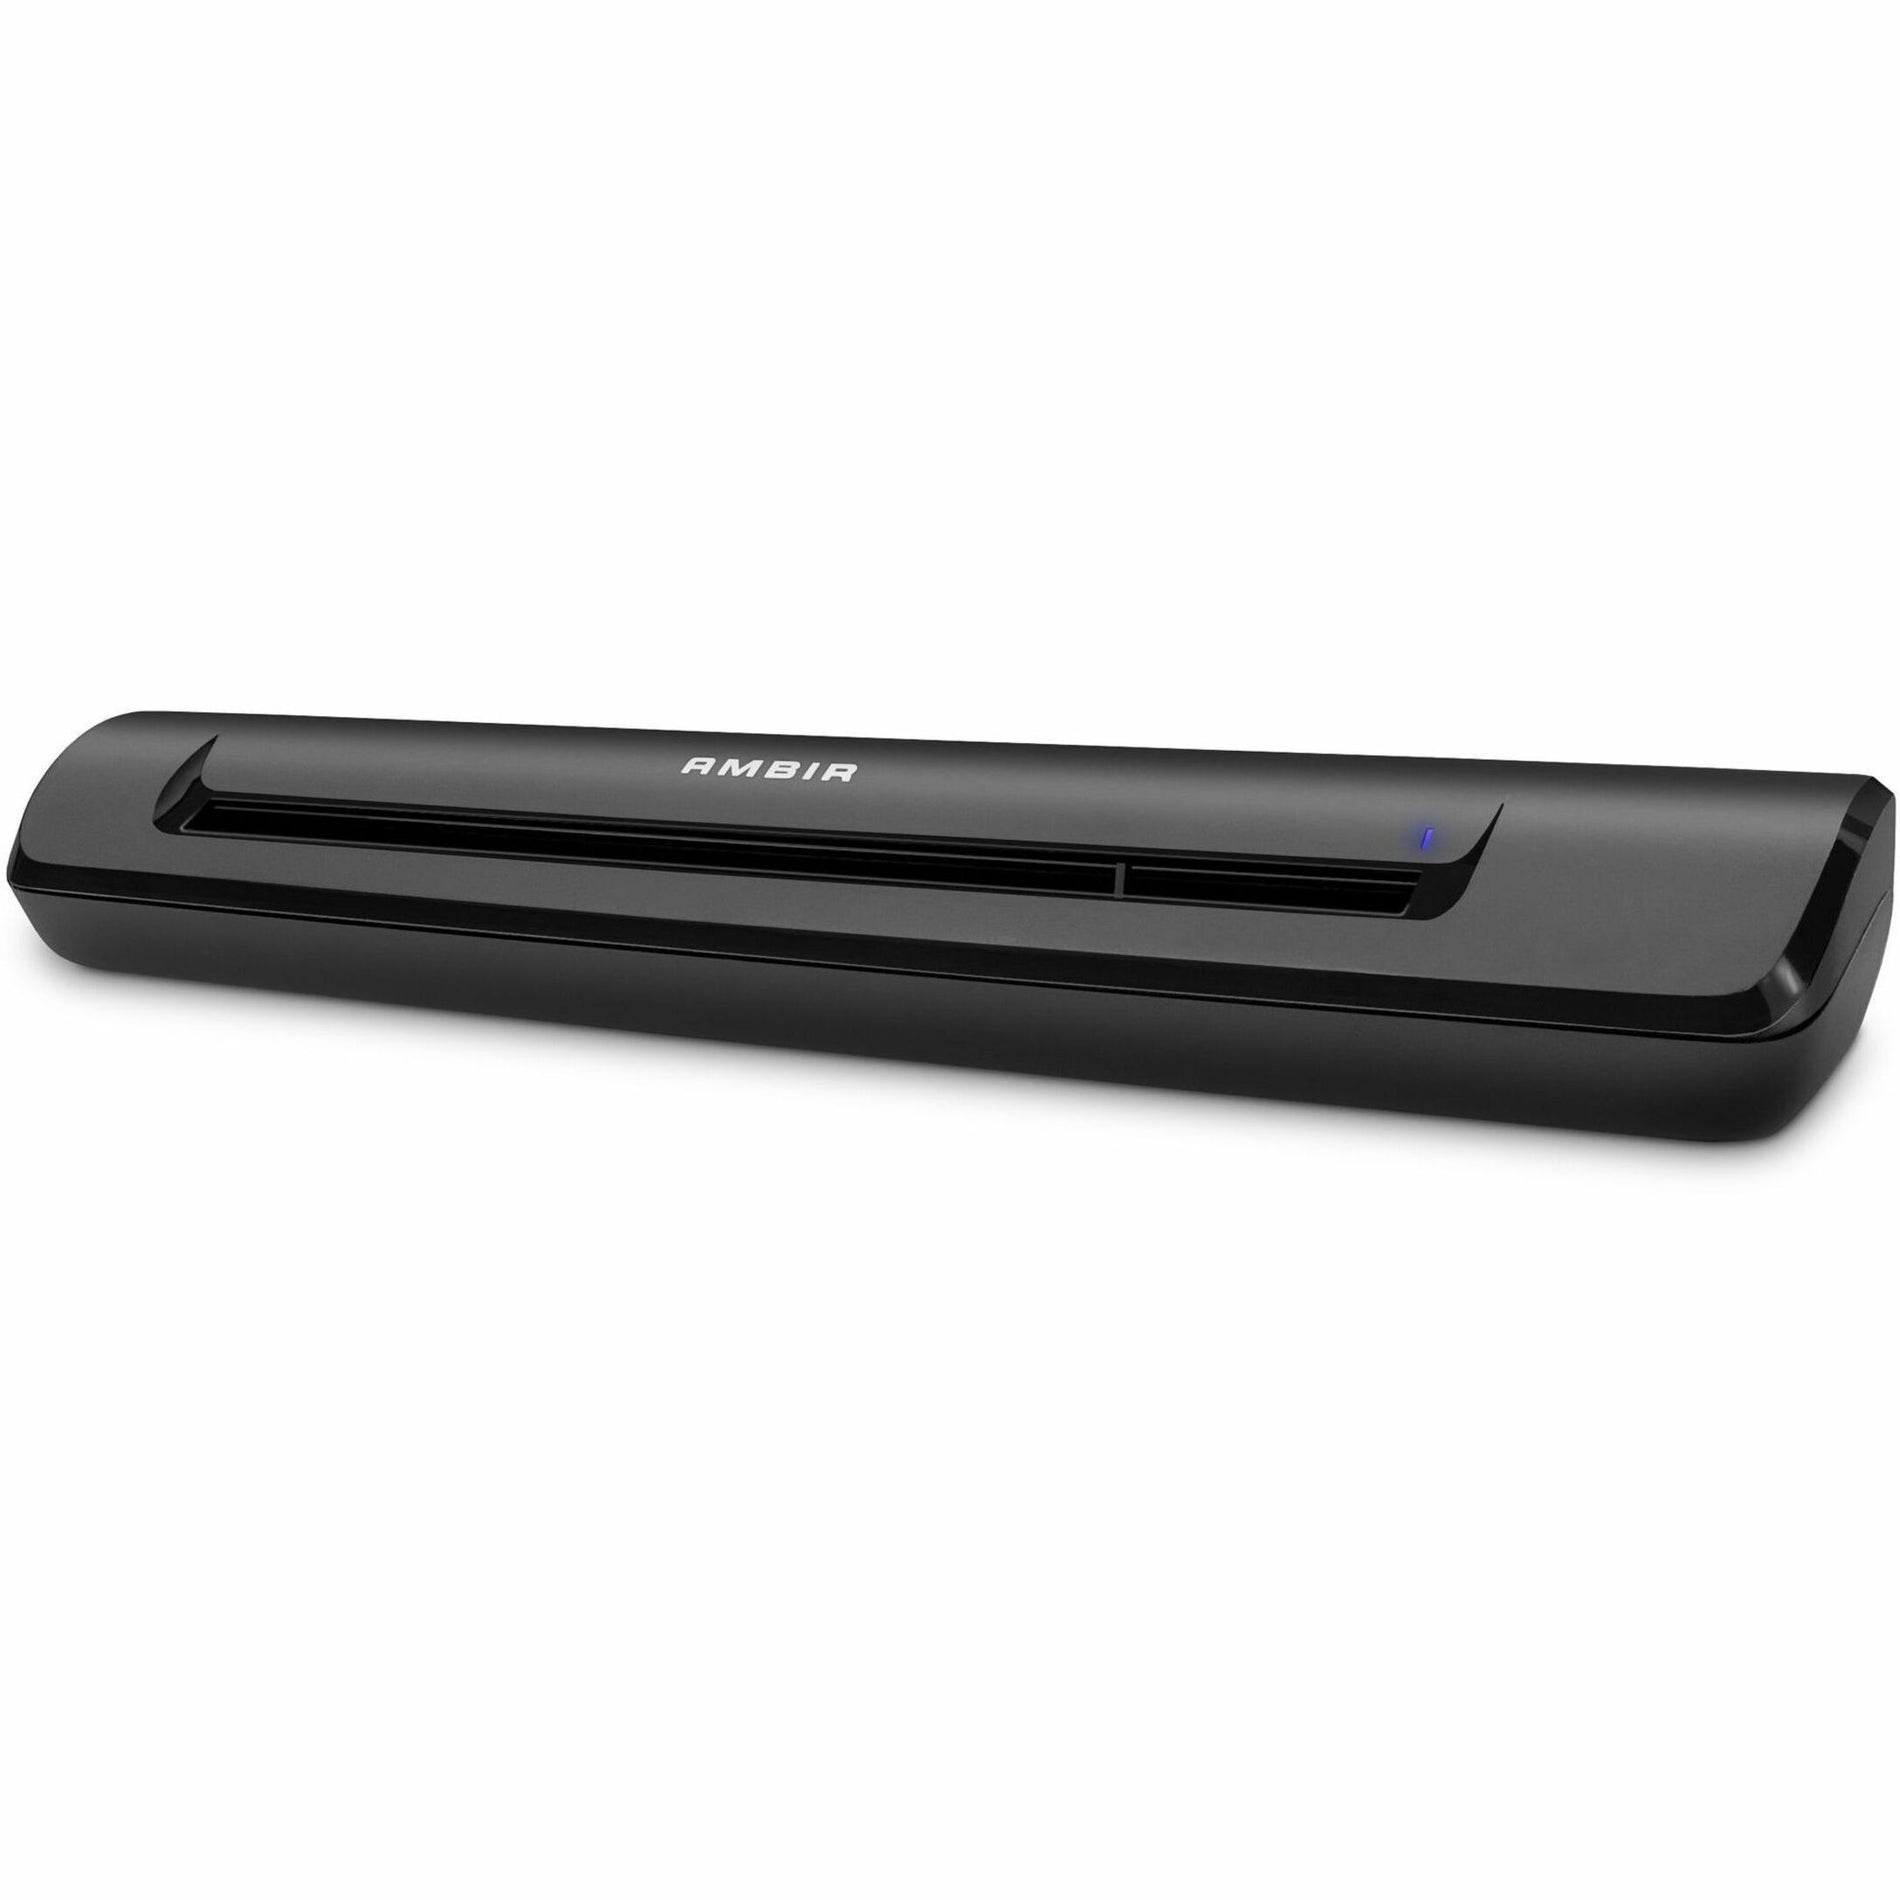 Ambir PS600-AS TravelScan Pro 600 Simplex Document Scanner with AmbirScan, Portable Sheetfed Scanner